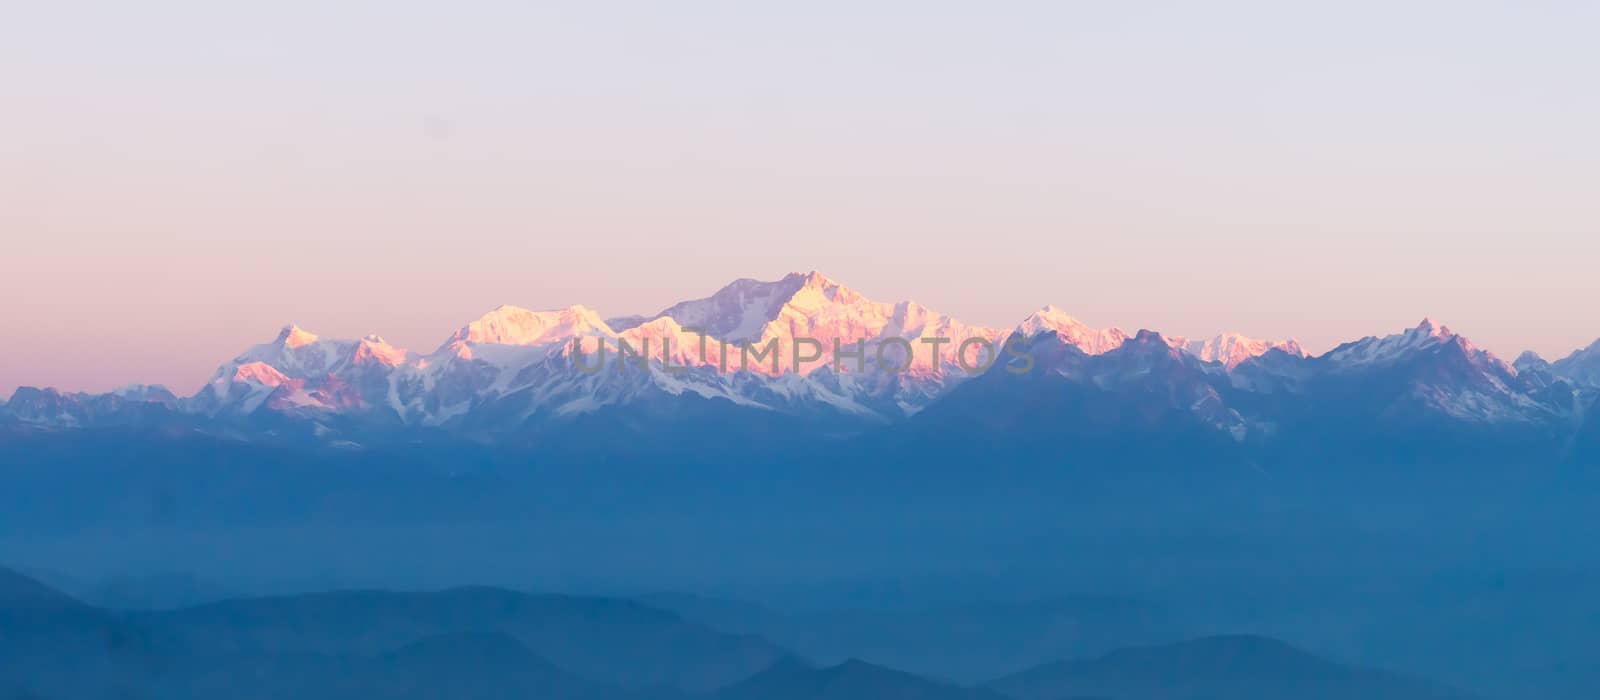 Panorama of majestic Mount Kanchendzonga range of himalayas at first sunrise from Tiger Hill. First ray of sun struck mountain starting beautiful day on entire nature around. Darjeeling, Sikkim, India by sudiptabhowmick